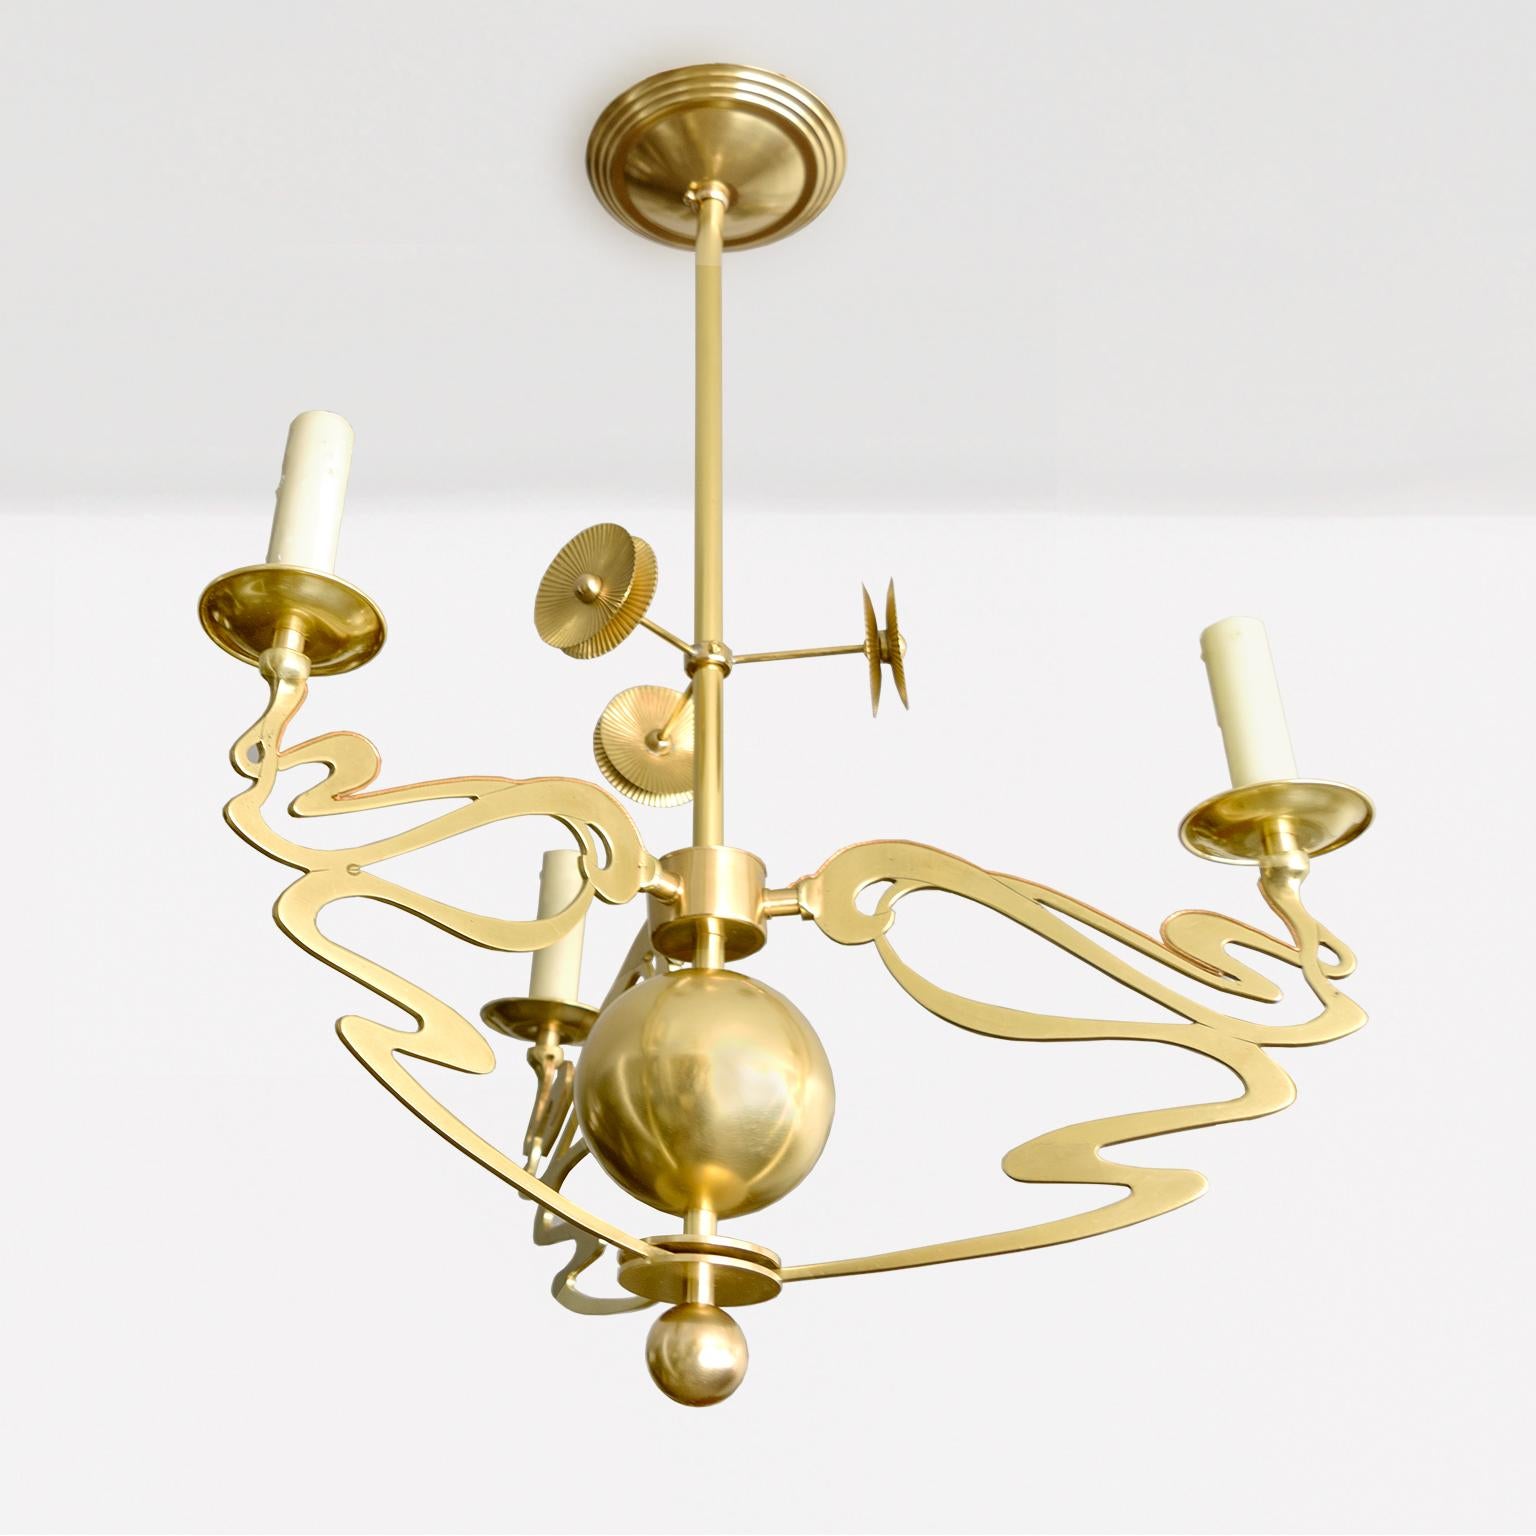 One of two Swedish Jugendstil 3-arm chandeliers in polished brass. Each chandelier has been newly restored, polished and lacquered. Newly electrified with candelabra sockets inside of wax covered sleeves. There are three floral inspired light